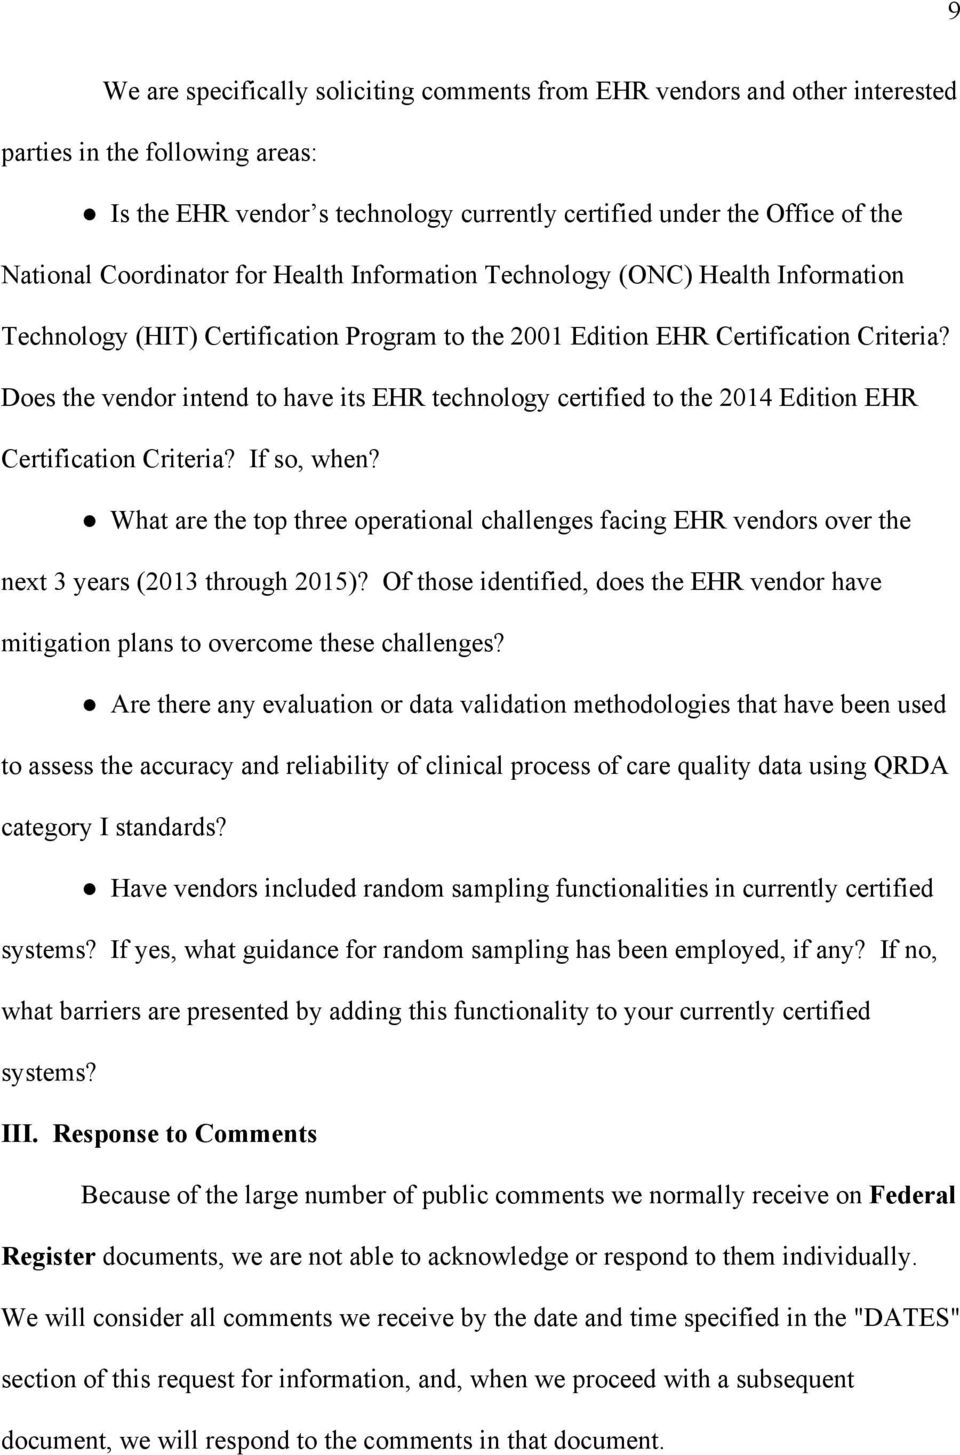 Does the vendor intend to have its EHR technology certified to the 2014 Edition EHR Certification Criteria? If so, when?